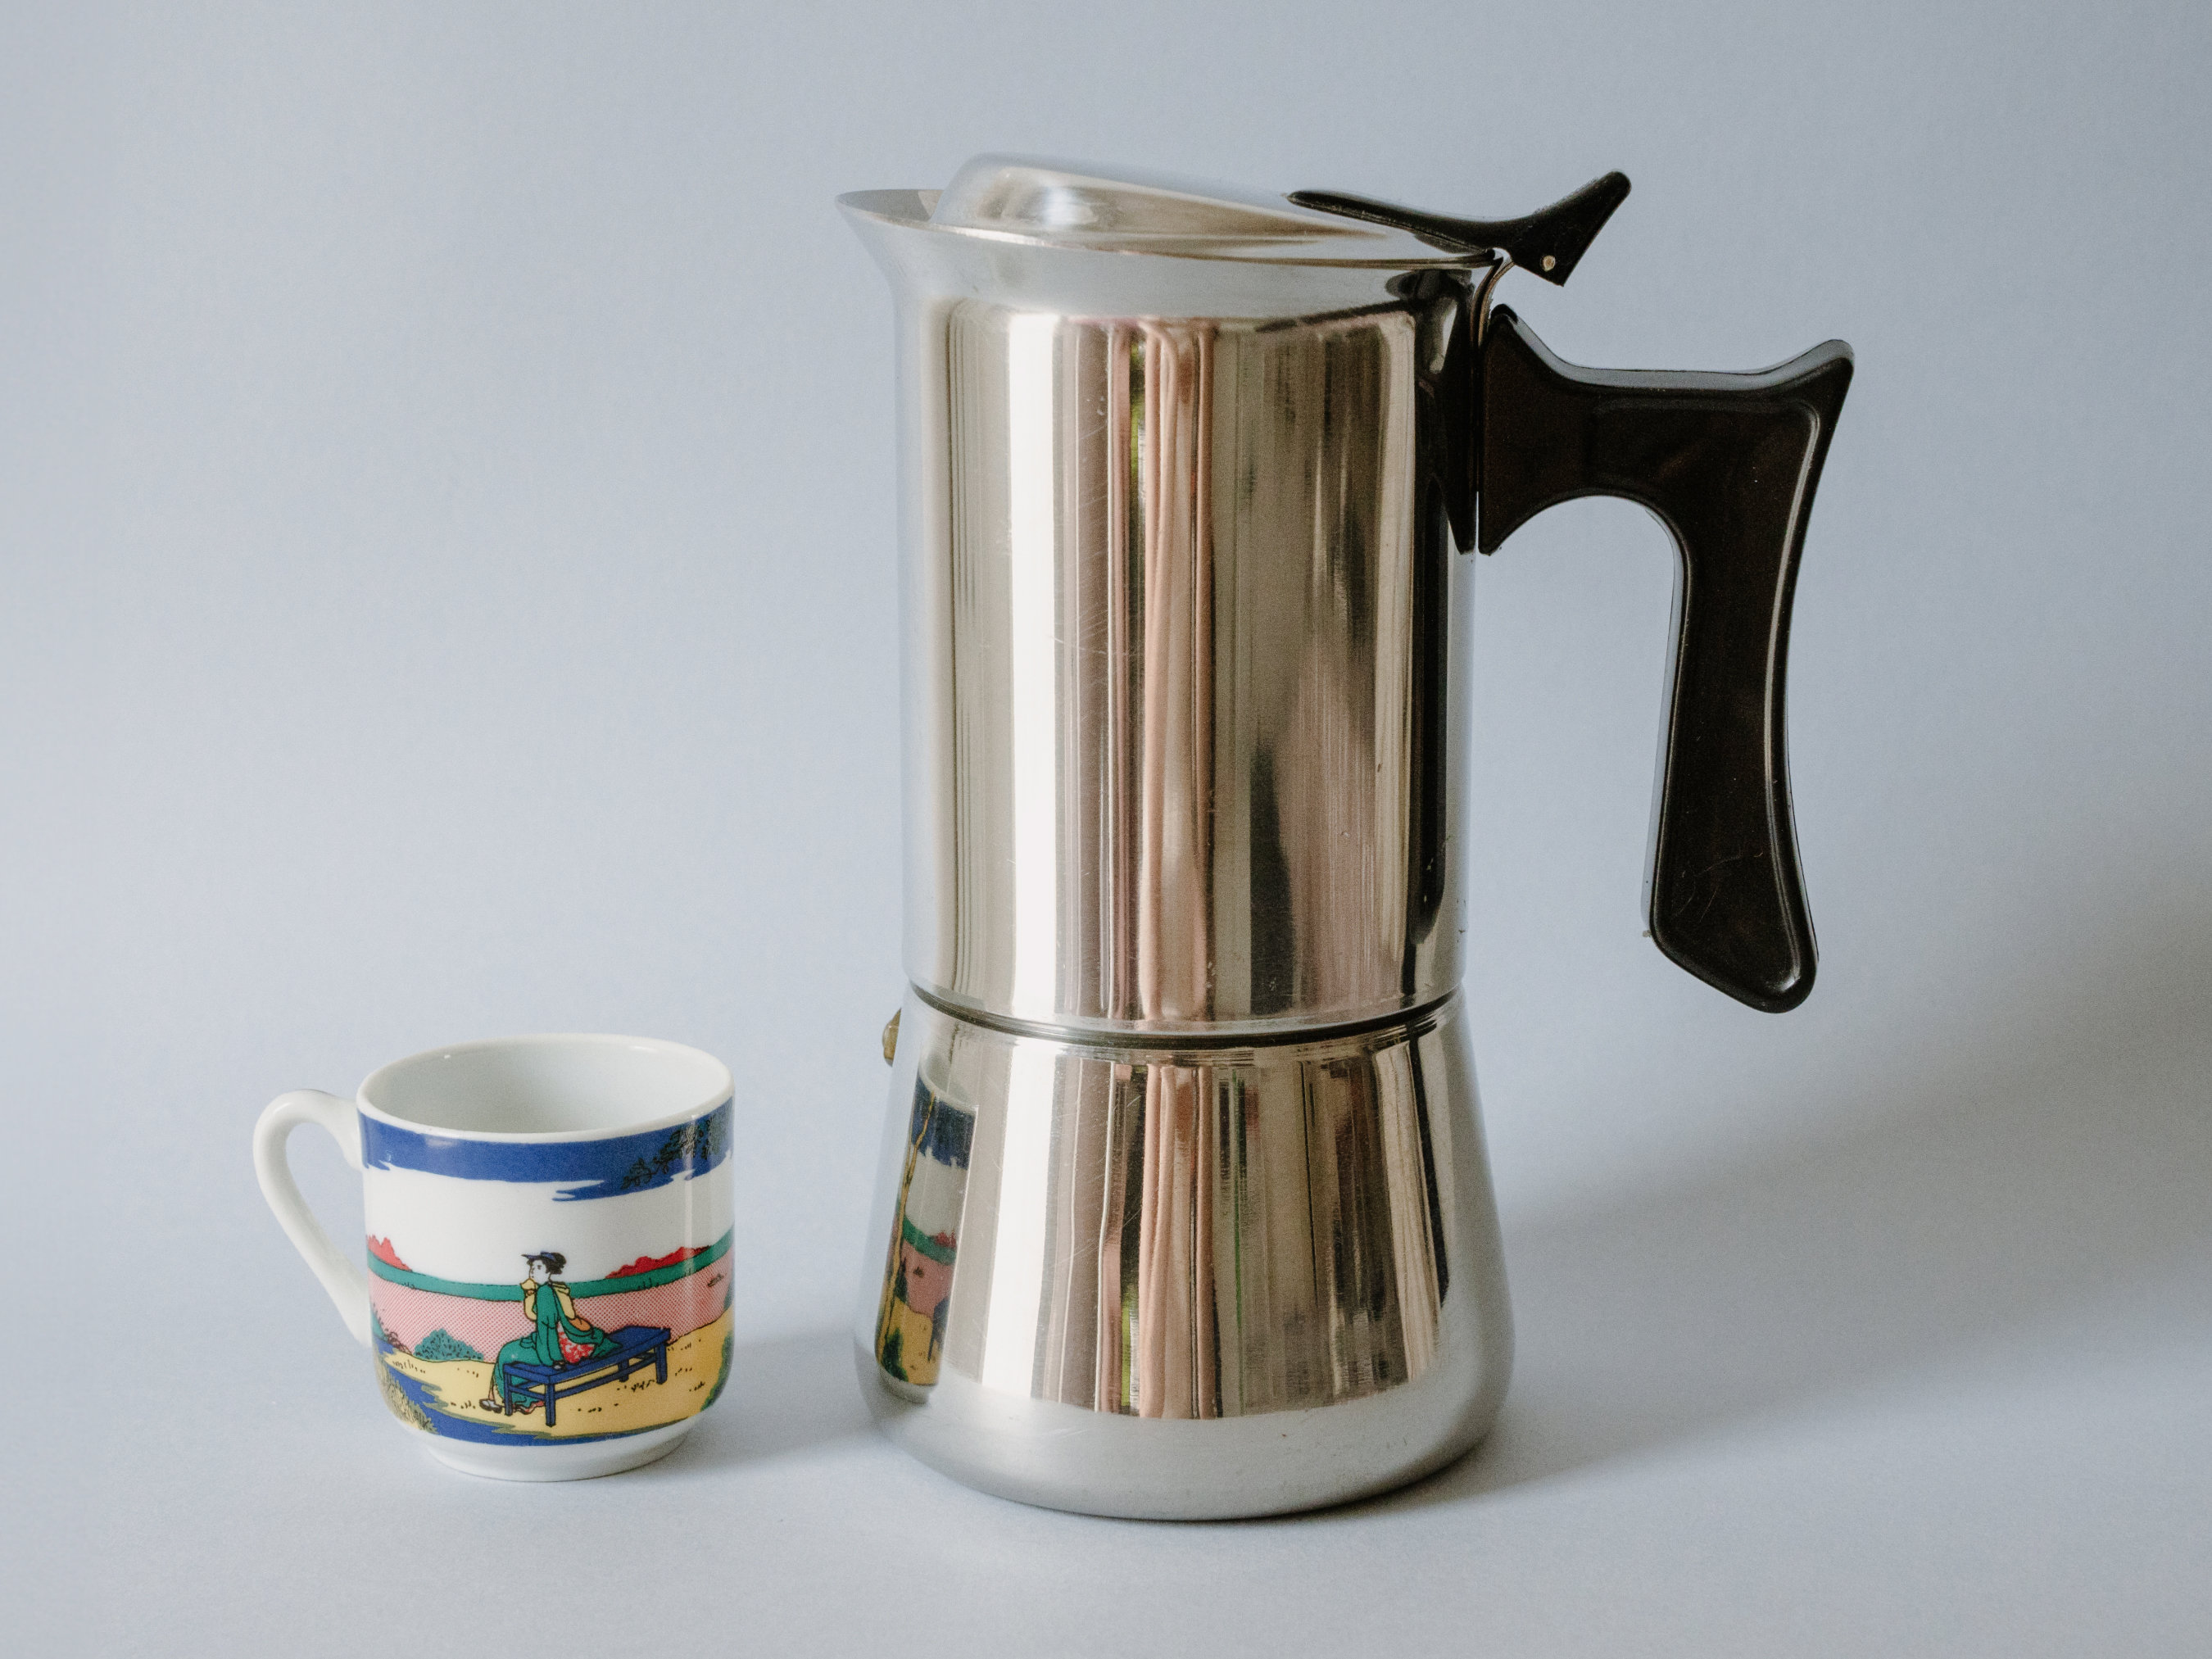 Rare Large nanni Coffee Maker 12 Numbered Cups Italian Espresso Coffee  Machine Stainless Steel Made in Italy Vintage Coffee Maker Large 